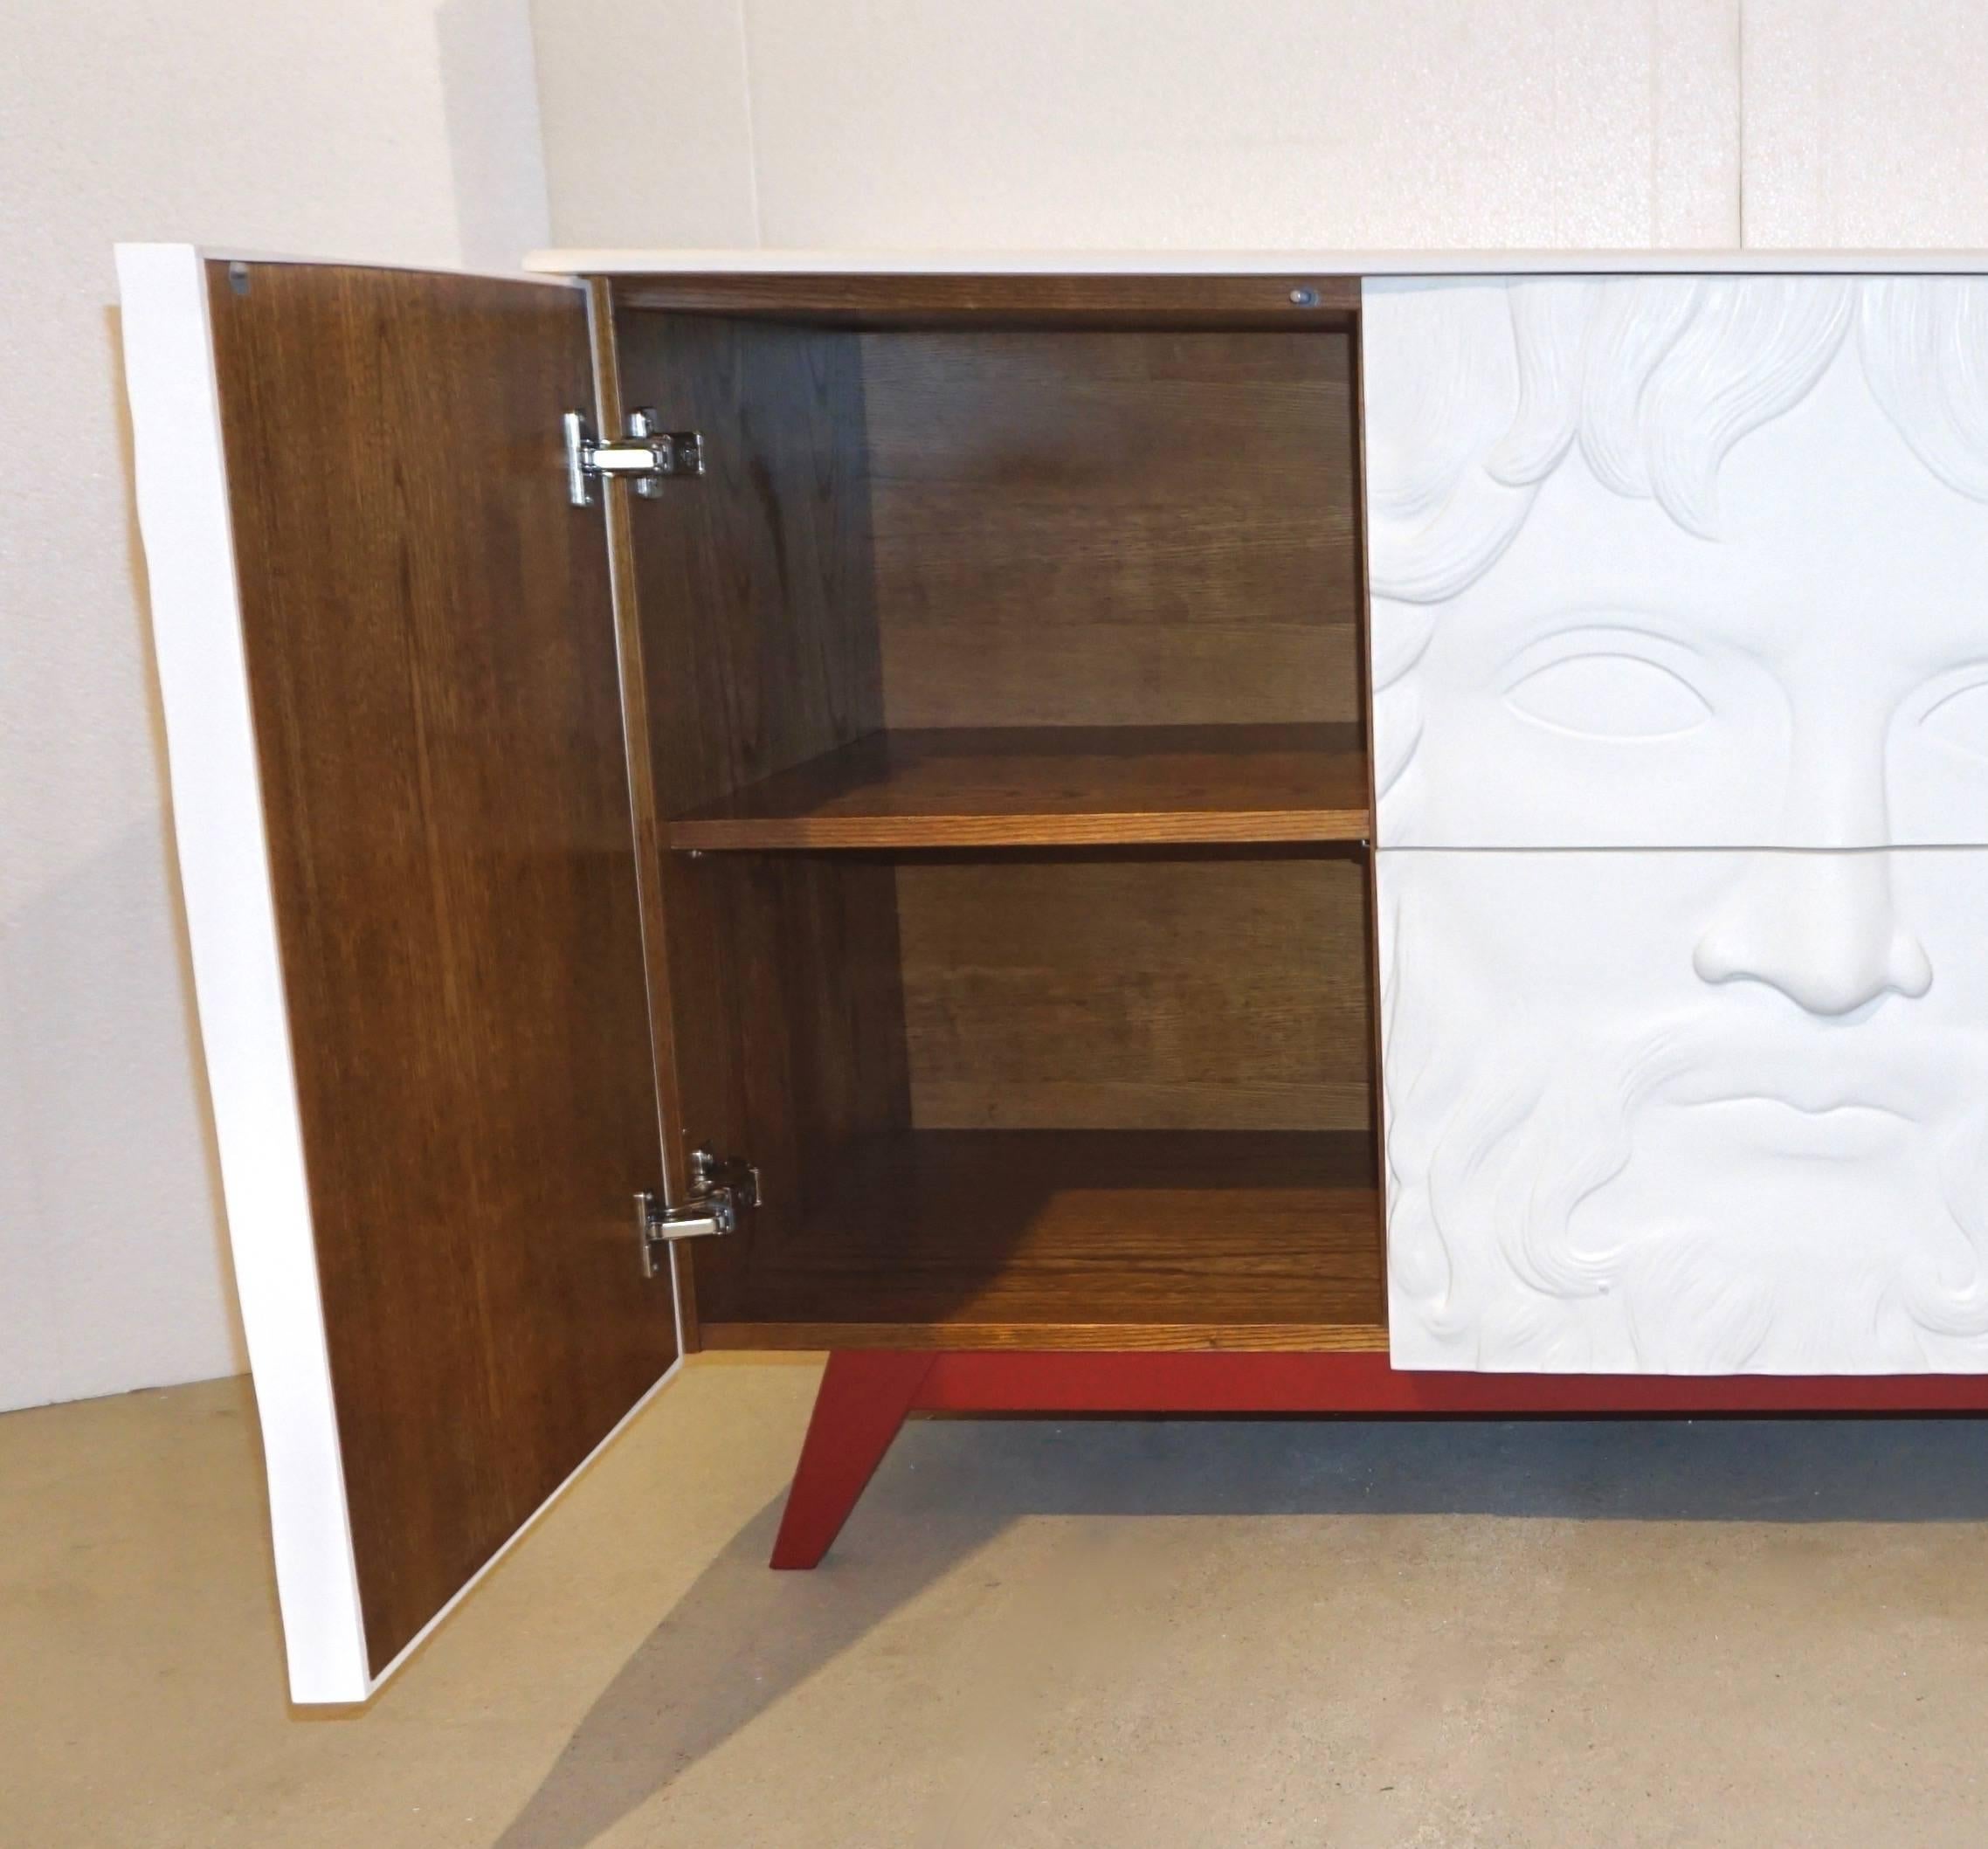 Hand-Crafted Contemporary Italian Design White Sideboard or Cabinet with Burgundy Wood Legs